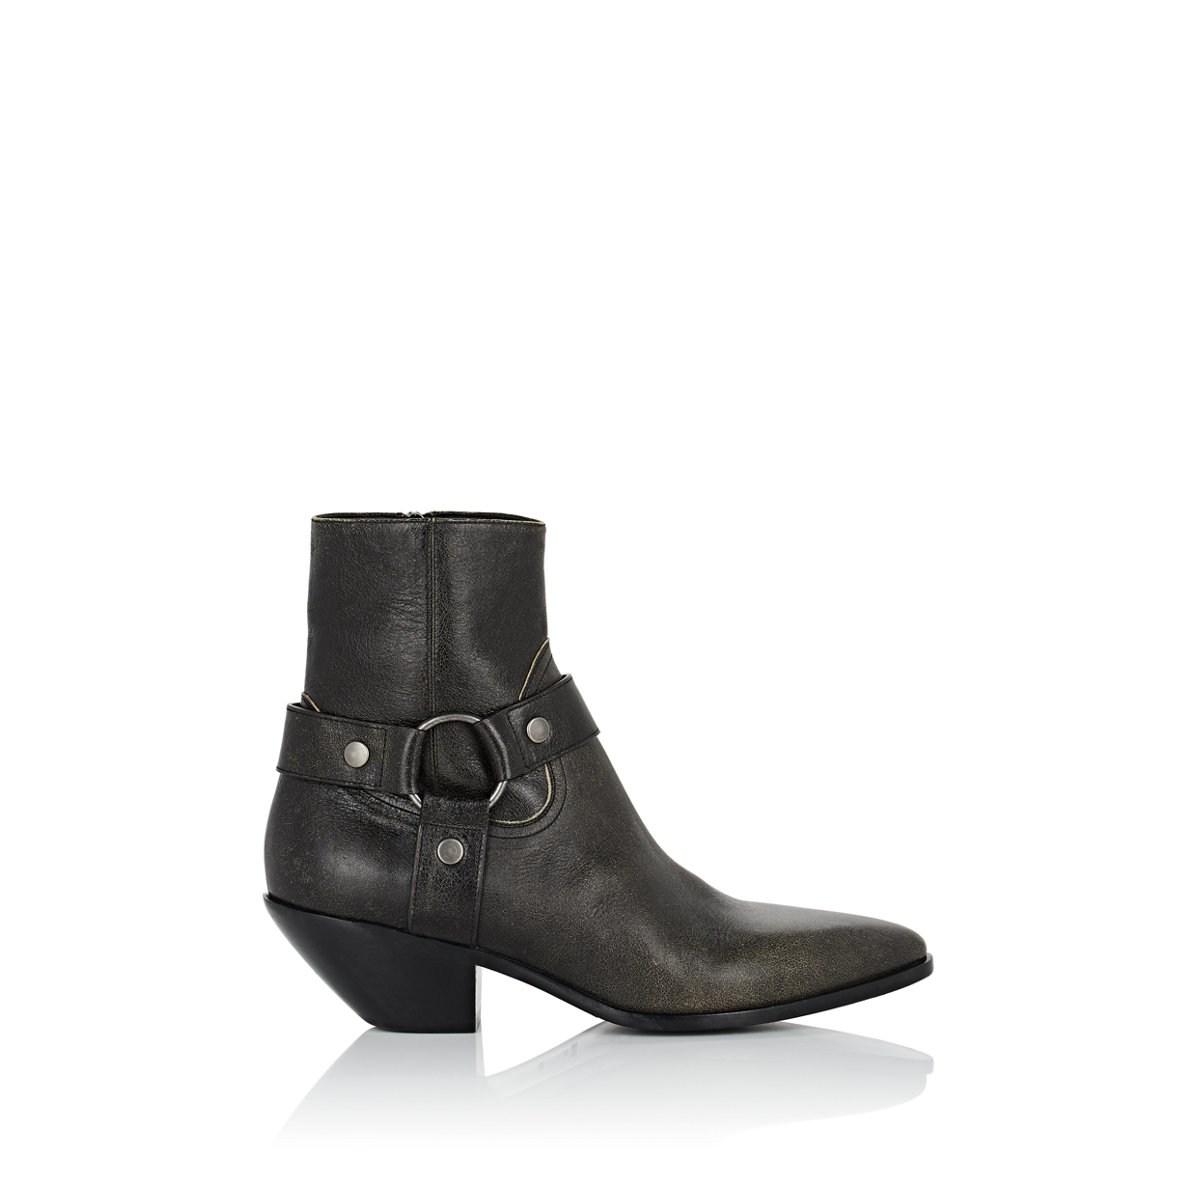 Saint Laurent Leather Harness Ankle Boots in dk.Brown (Brown) - Lyst